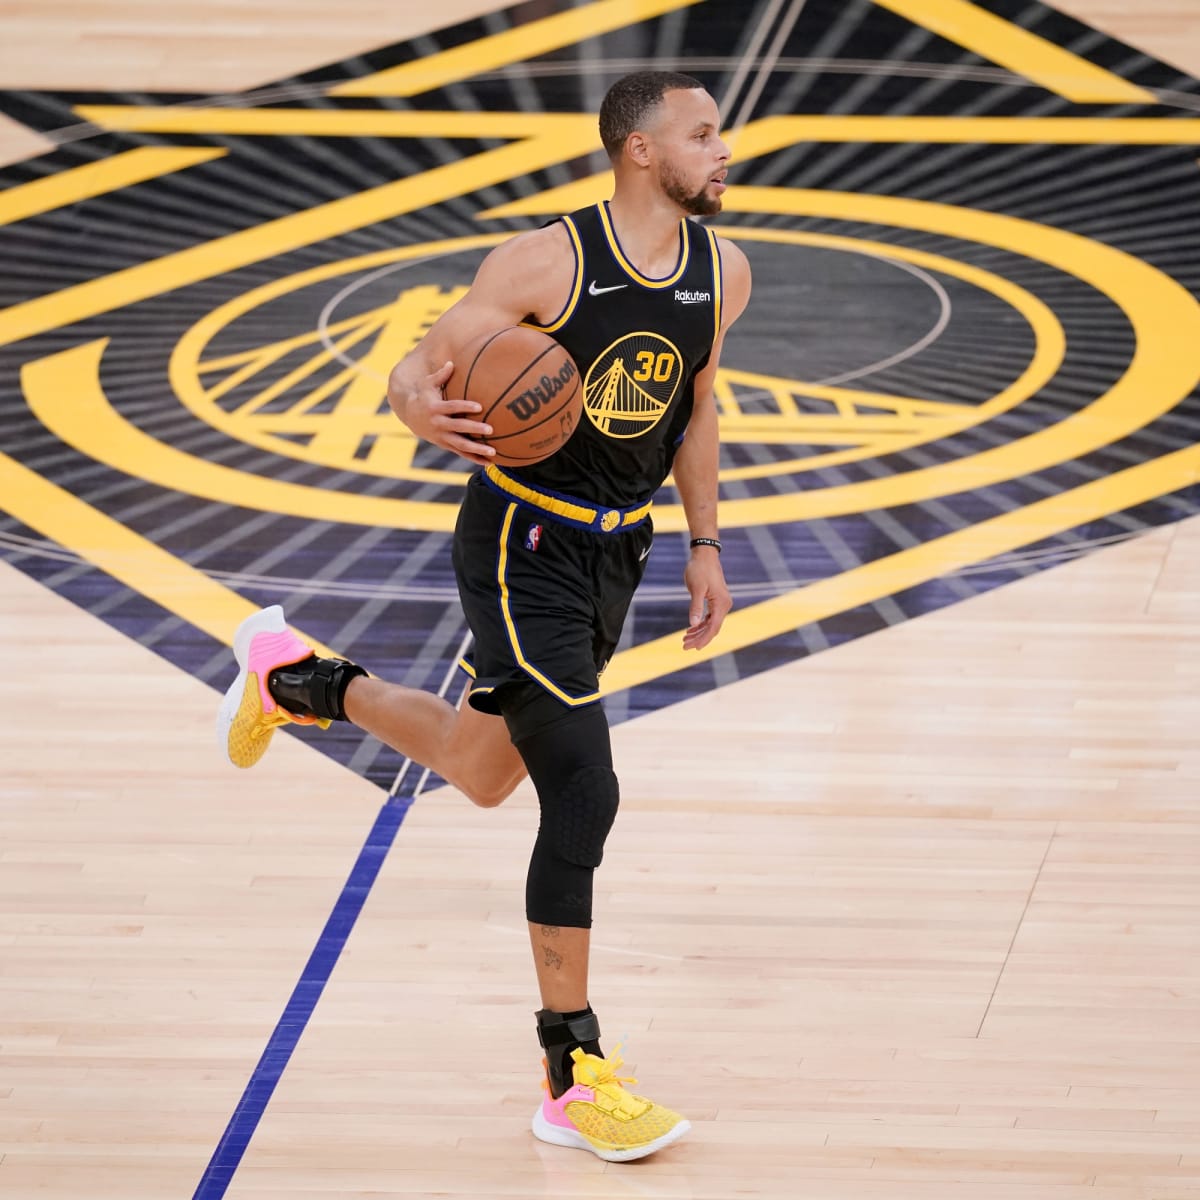 stephen curry wallpaper,basketball player,basketball moves,player